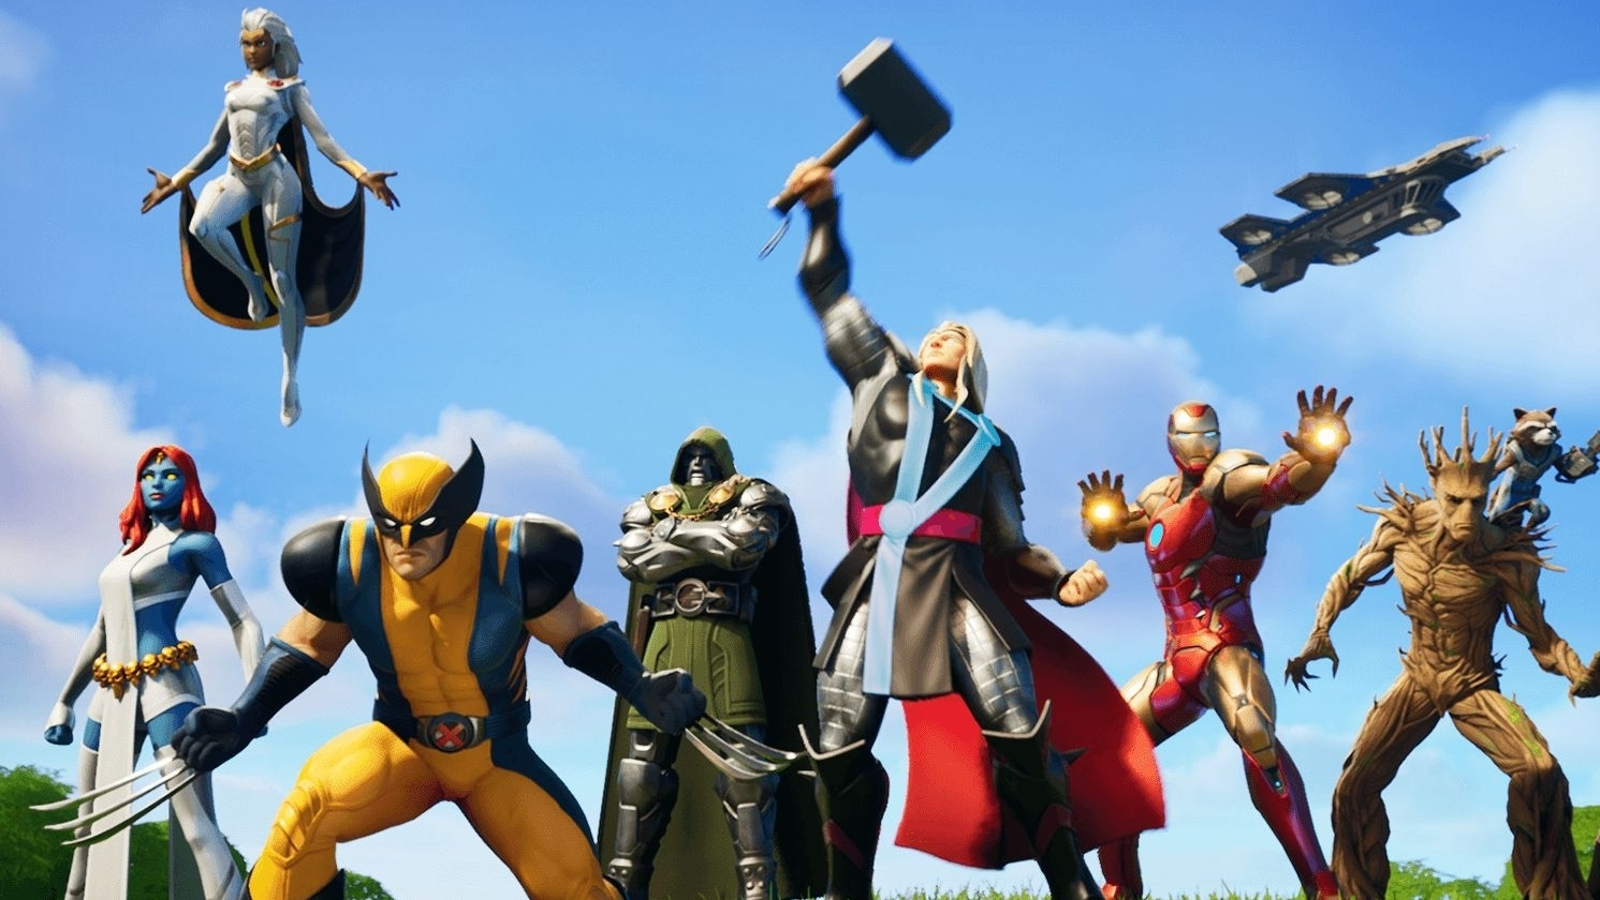 Fortnite Chapter 2 Season 4 Battle Pass skins, including Thor, Groot,  Storm, Mystique and tier 100 skin Iron Man